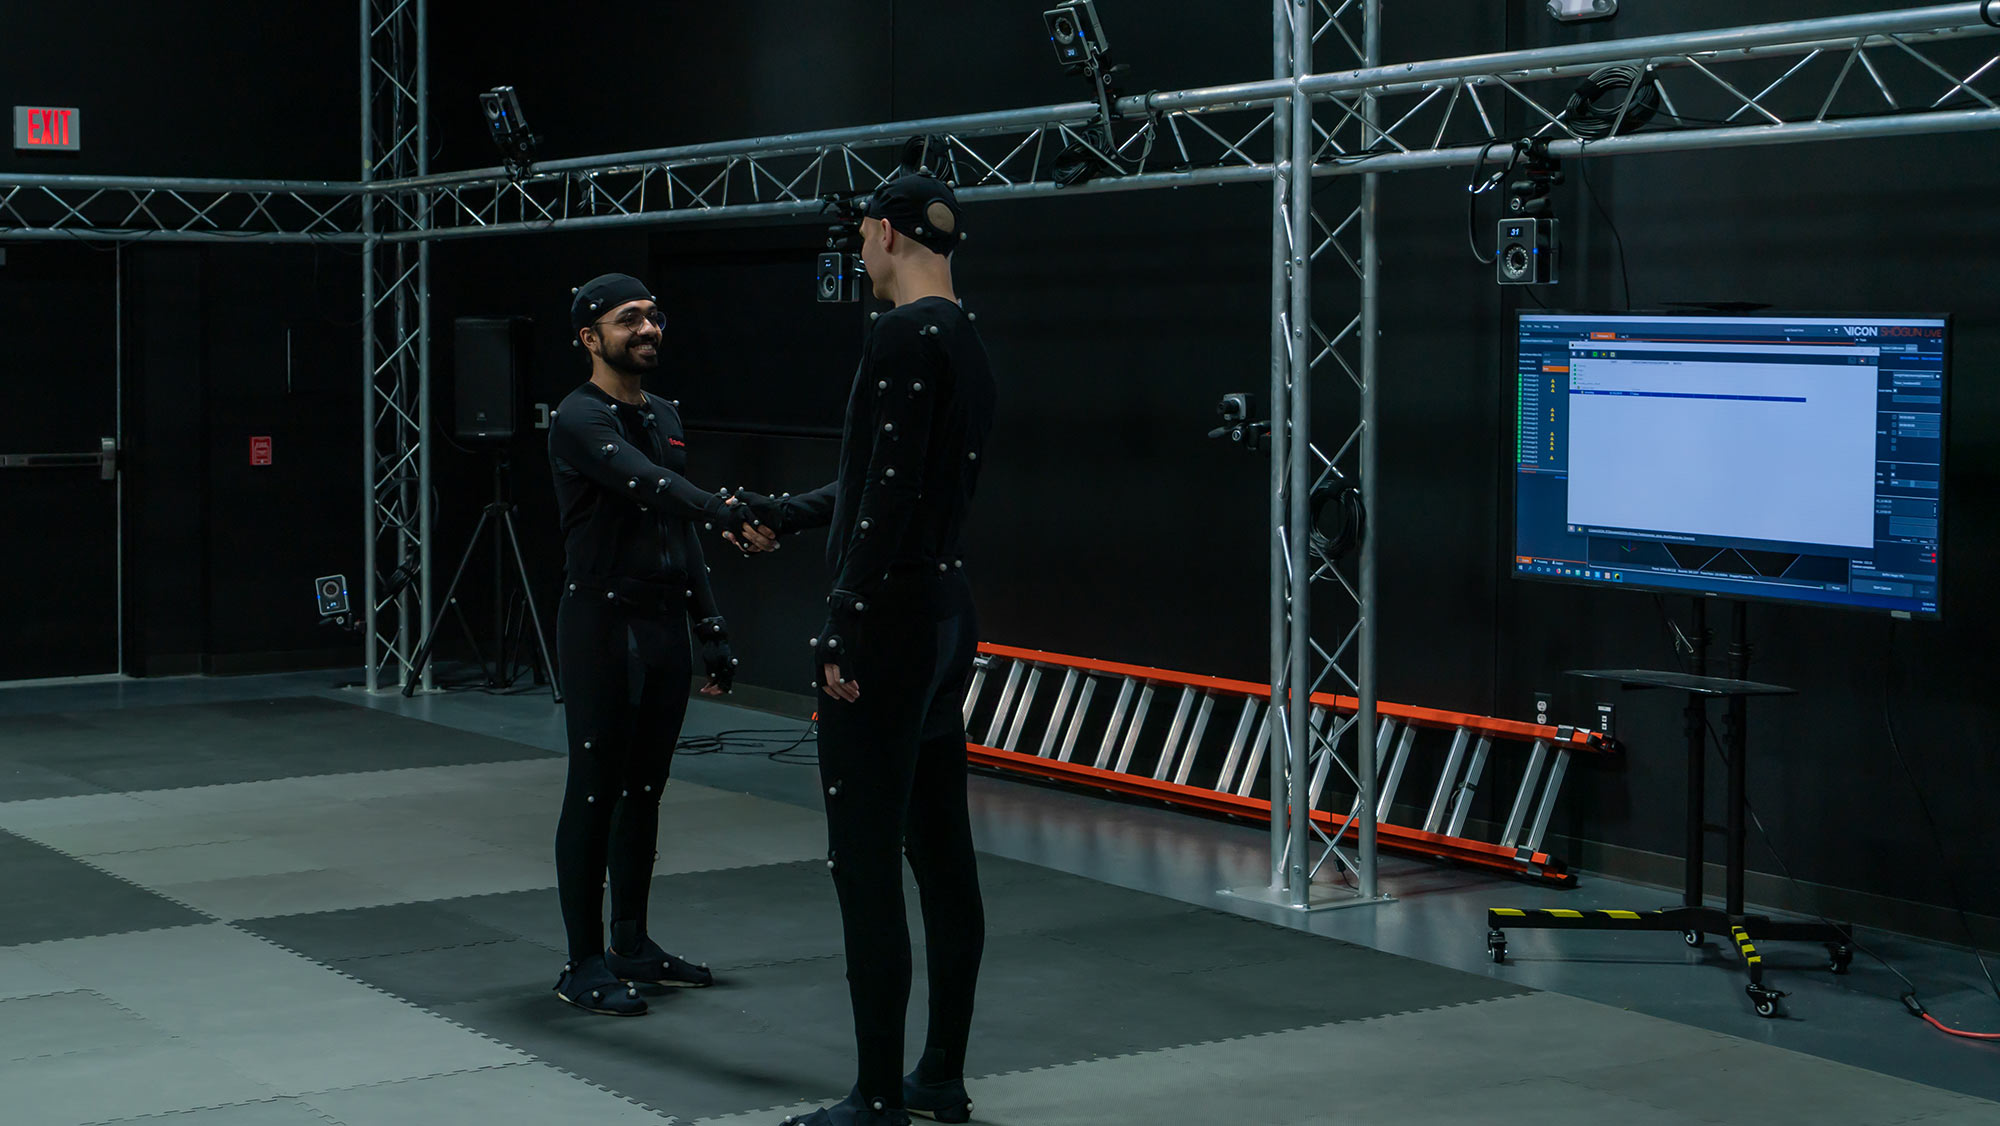 Student researchers using motion capture technology